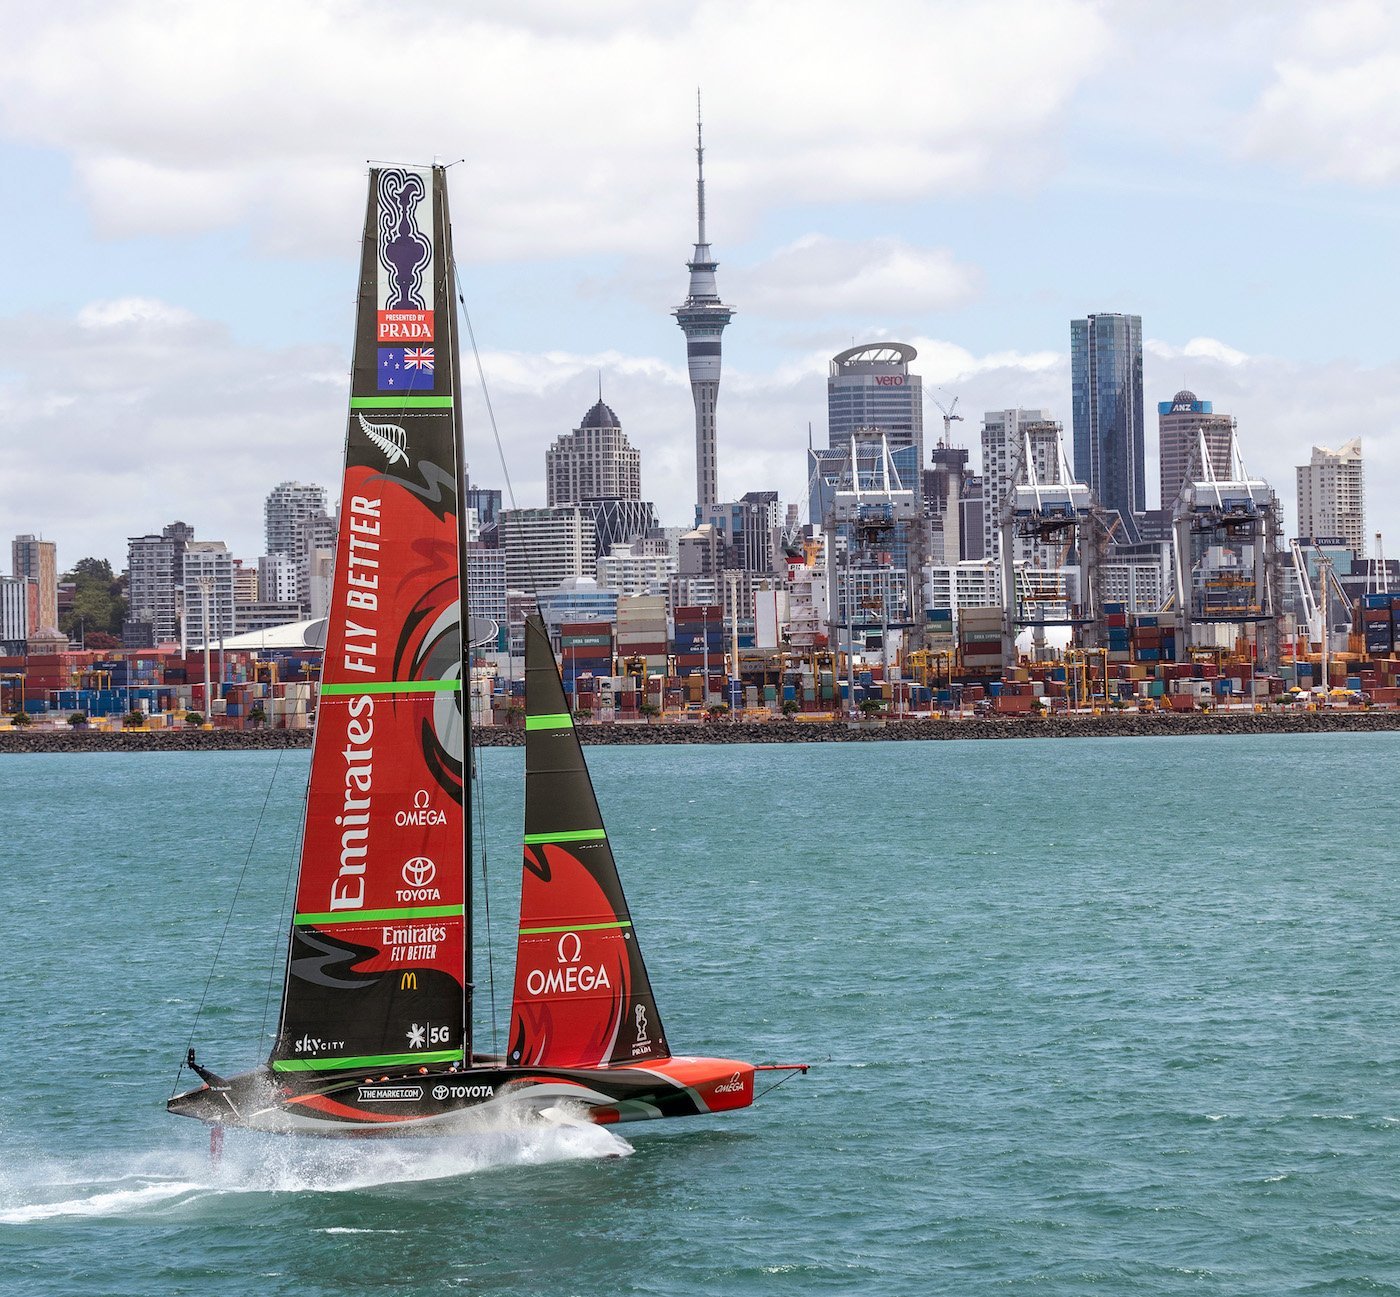 Omega in the starting blocks for the 36th America's Cup